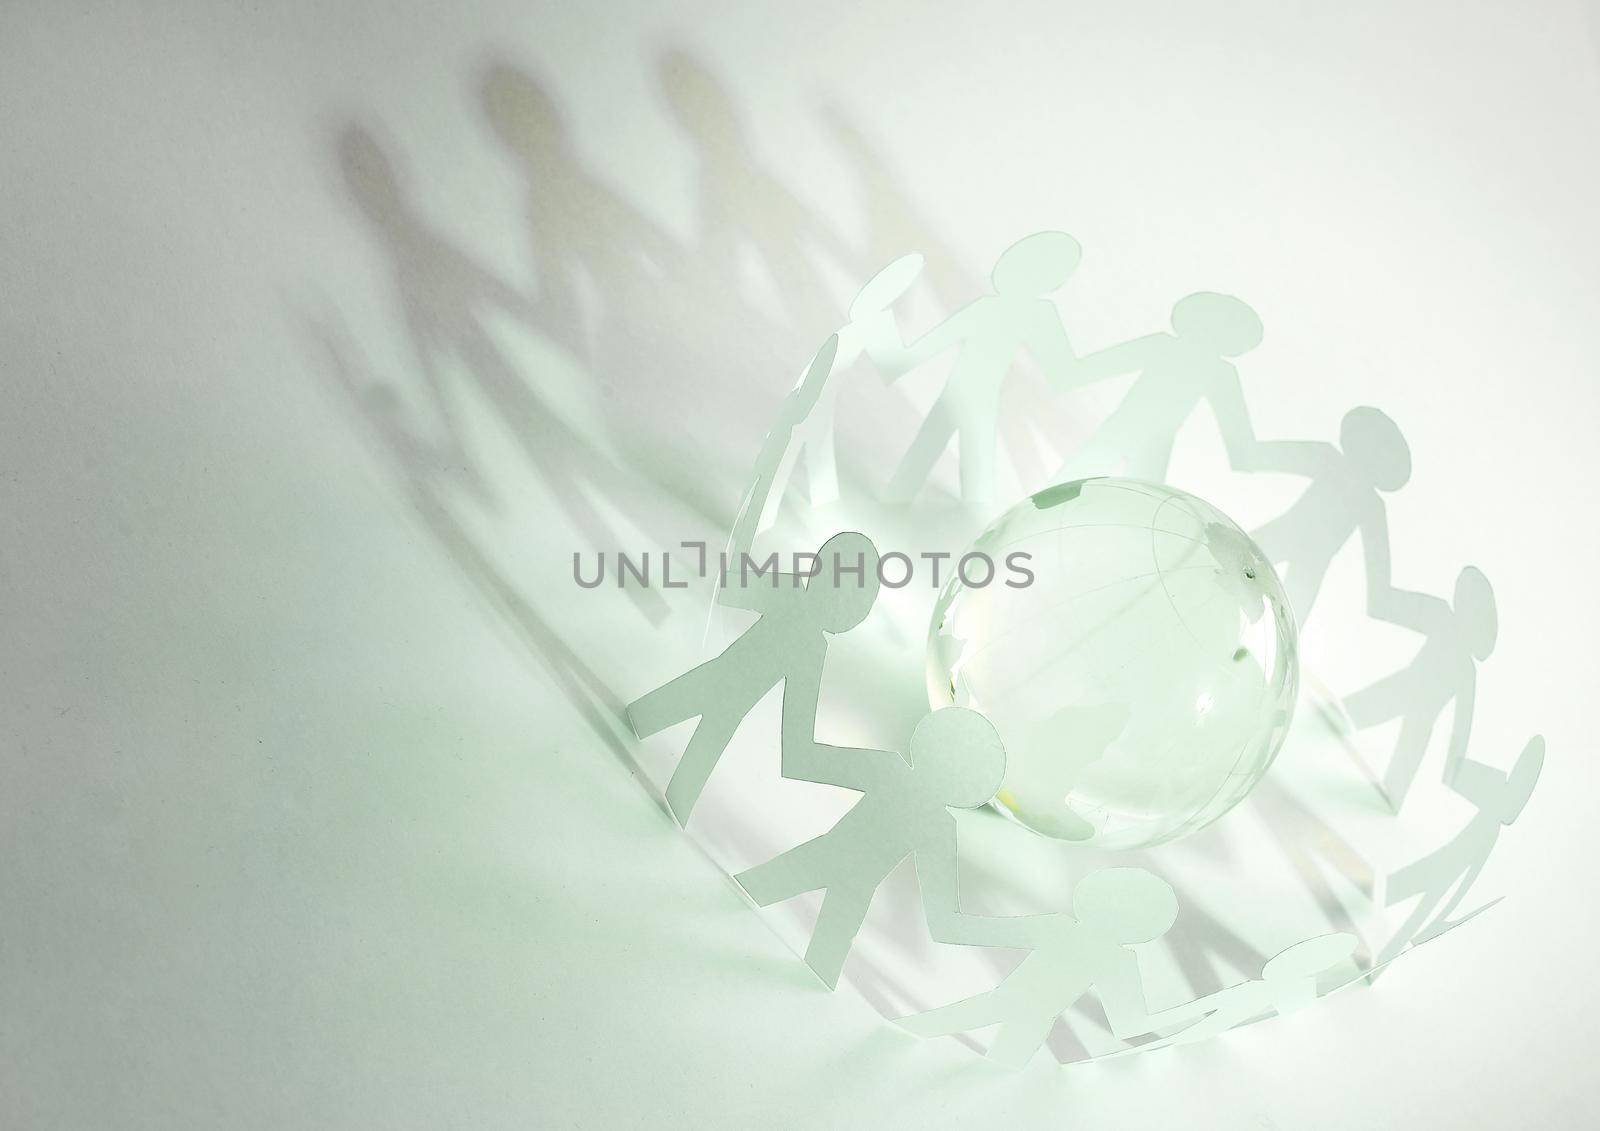 glass globe and a family of paper men on a green background. photo with copy space concept